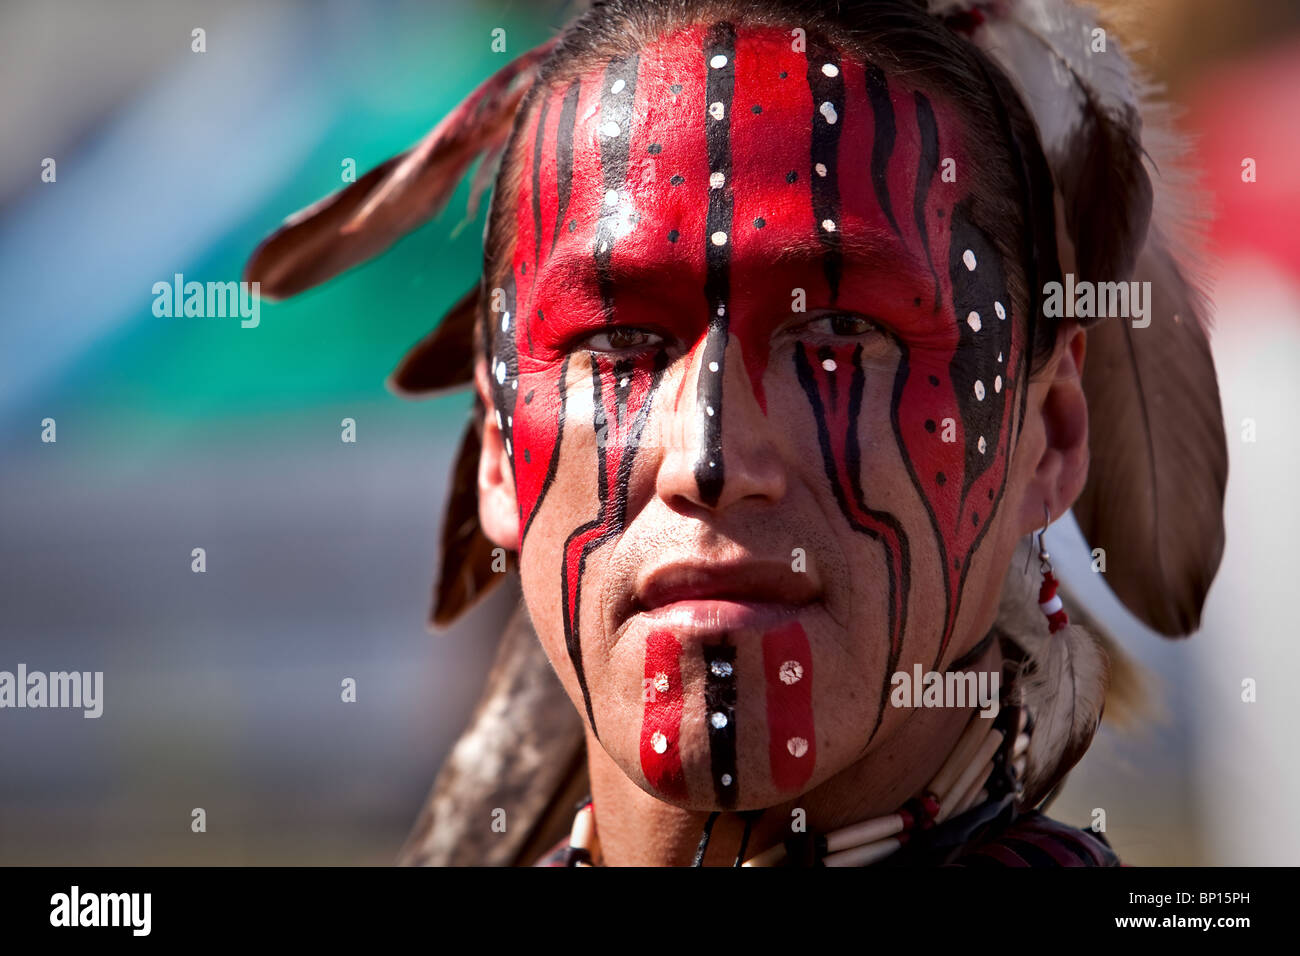 a native of Lac-Simon indian Reservation and wearing Algonquin traditional dresses and paint Stock Photo